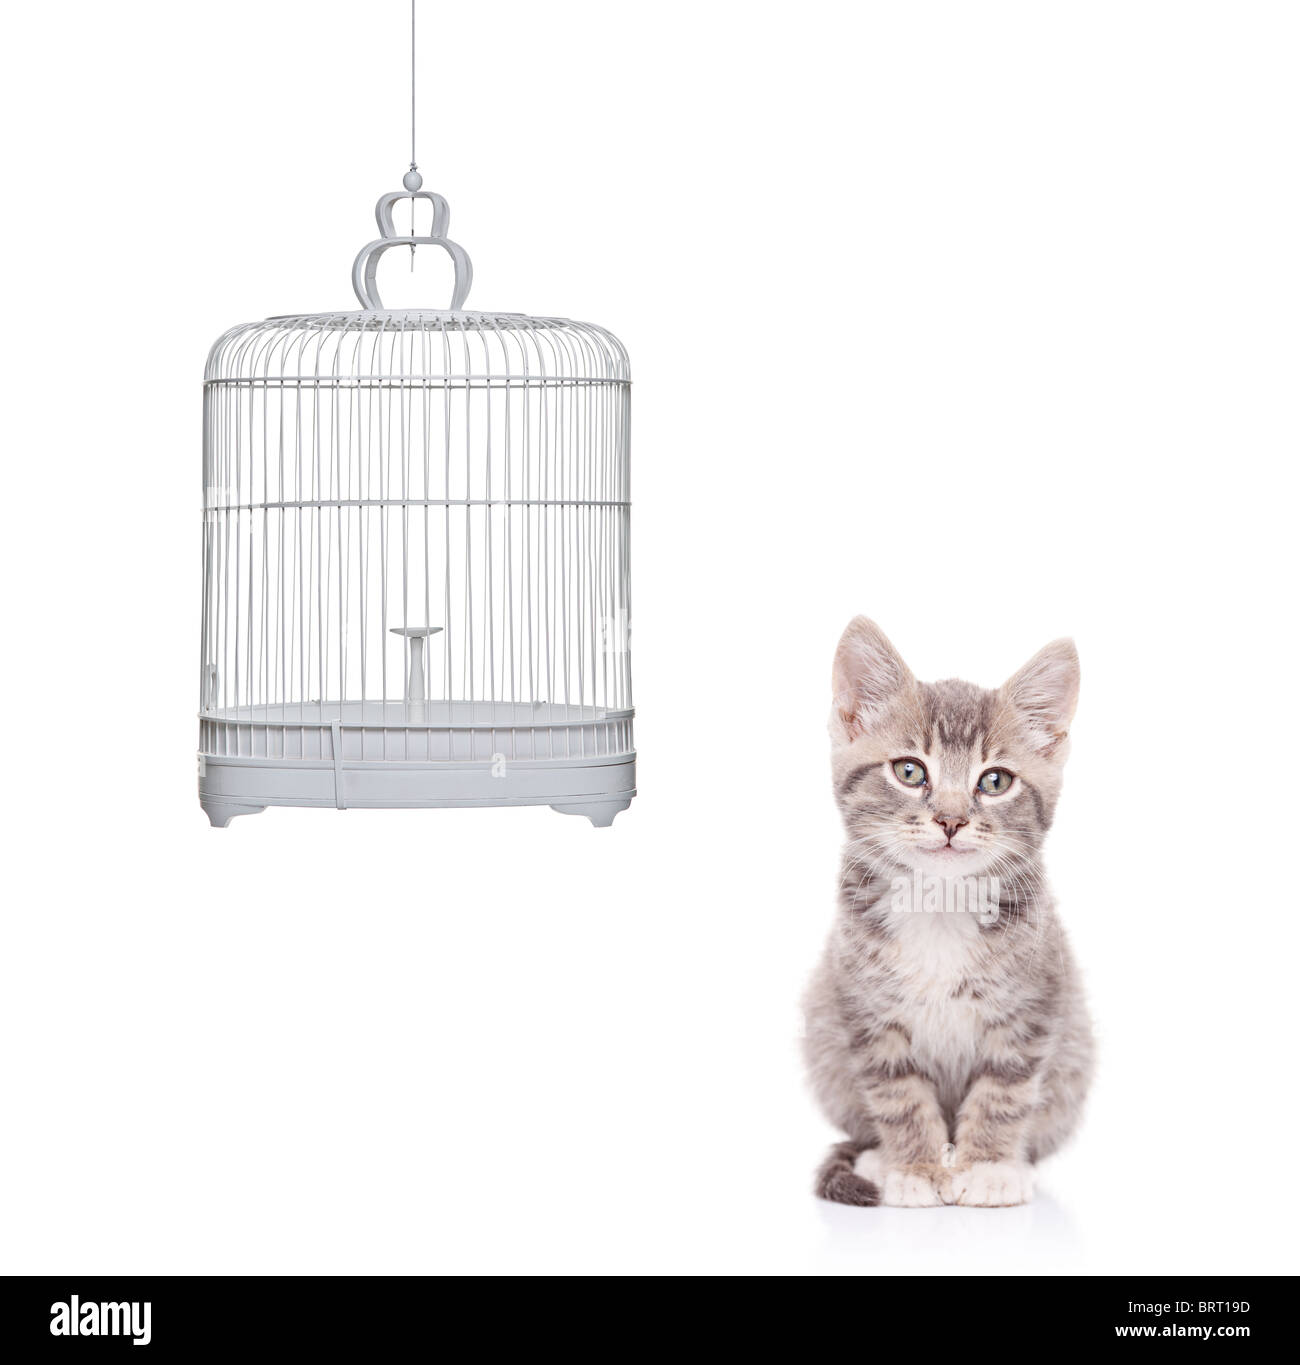 A view of a cat and an empty bird cage Stock Photo